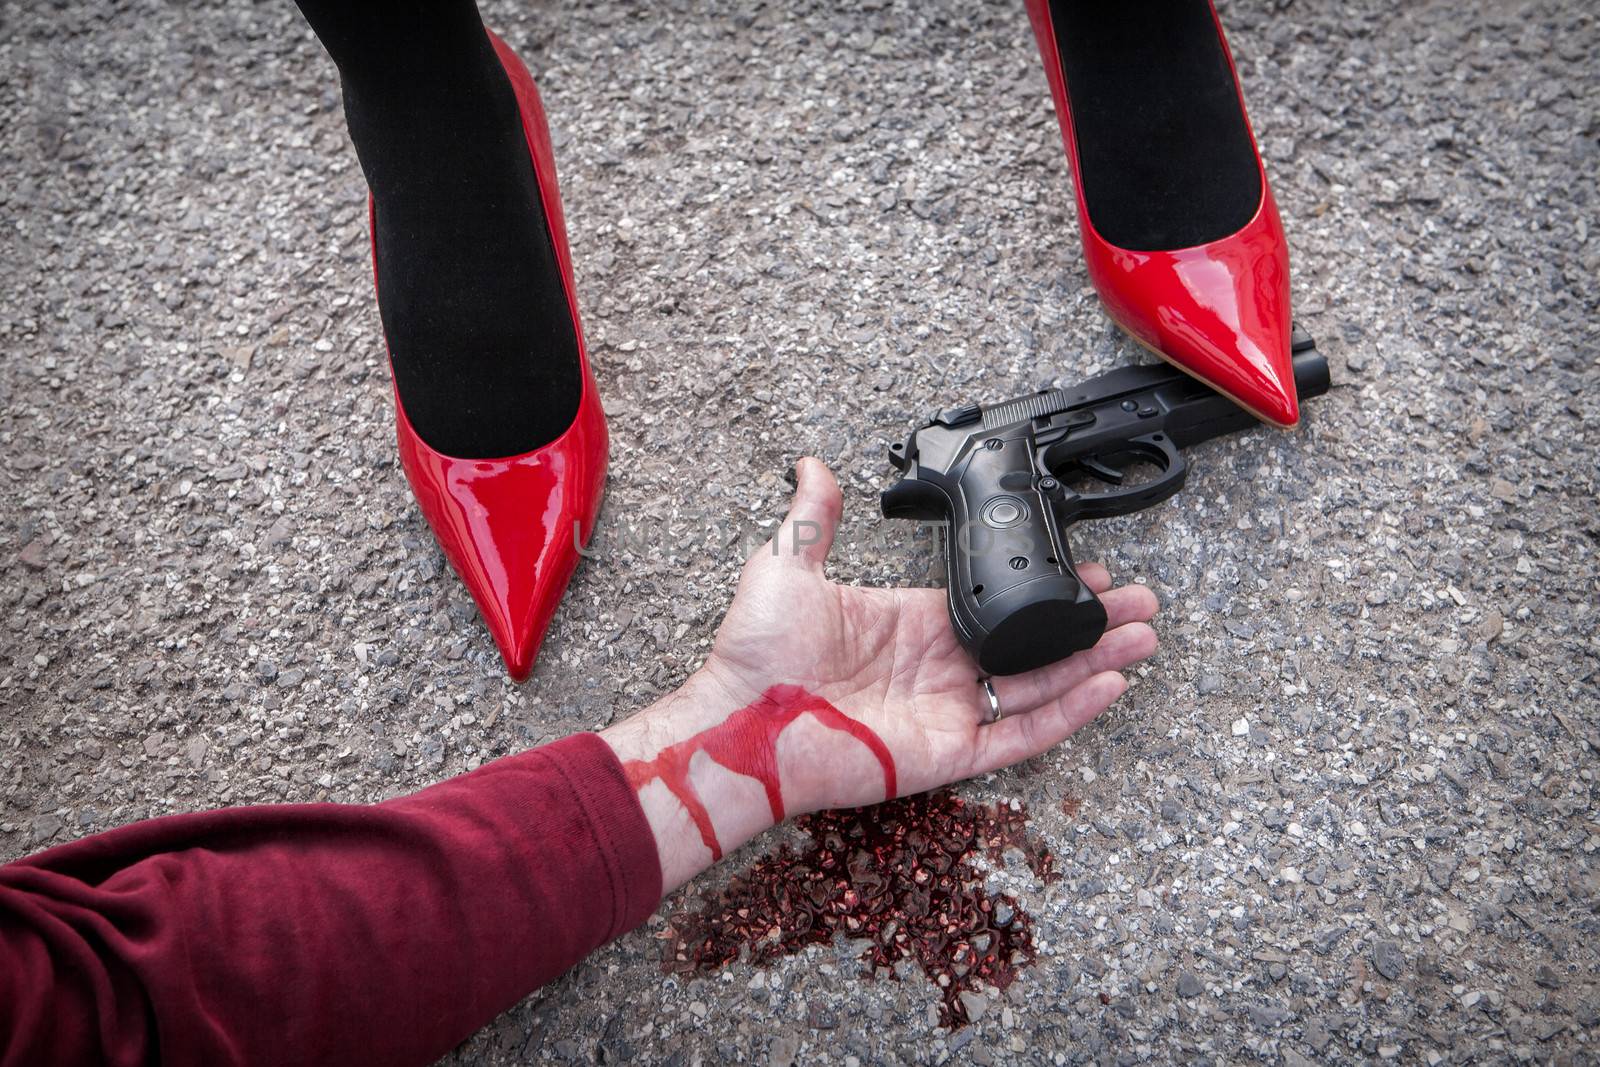 Man is dominated by a woman with red shoes, the shoe tread gun arm bloodied on the asphalt